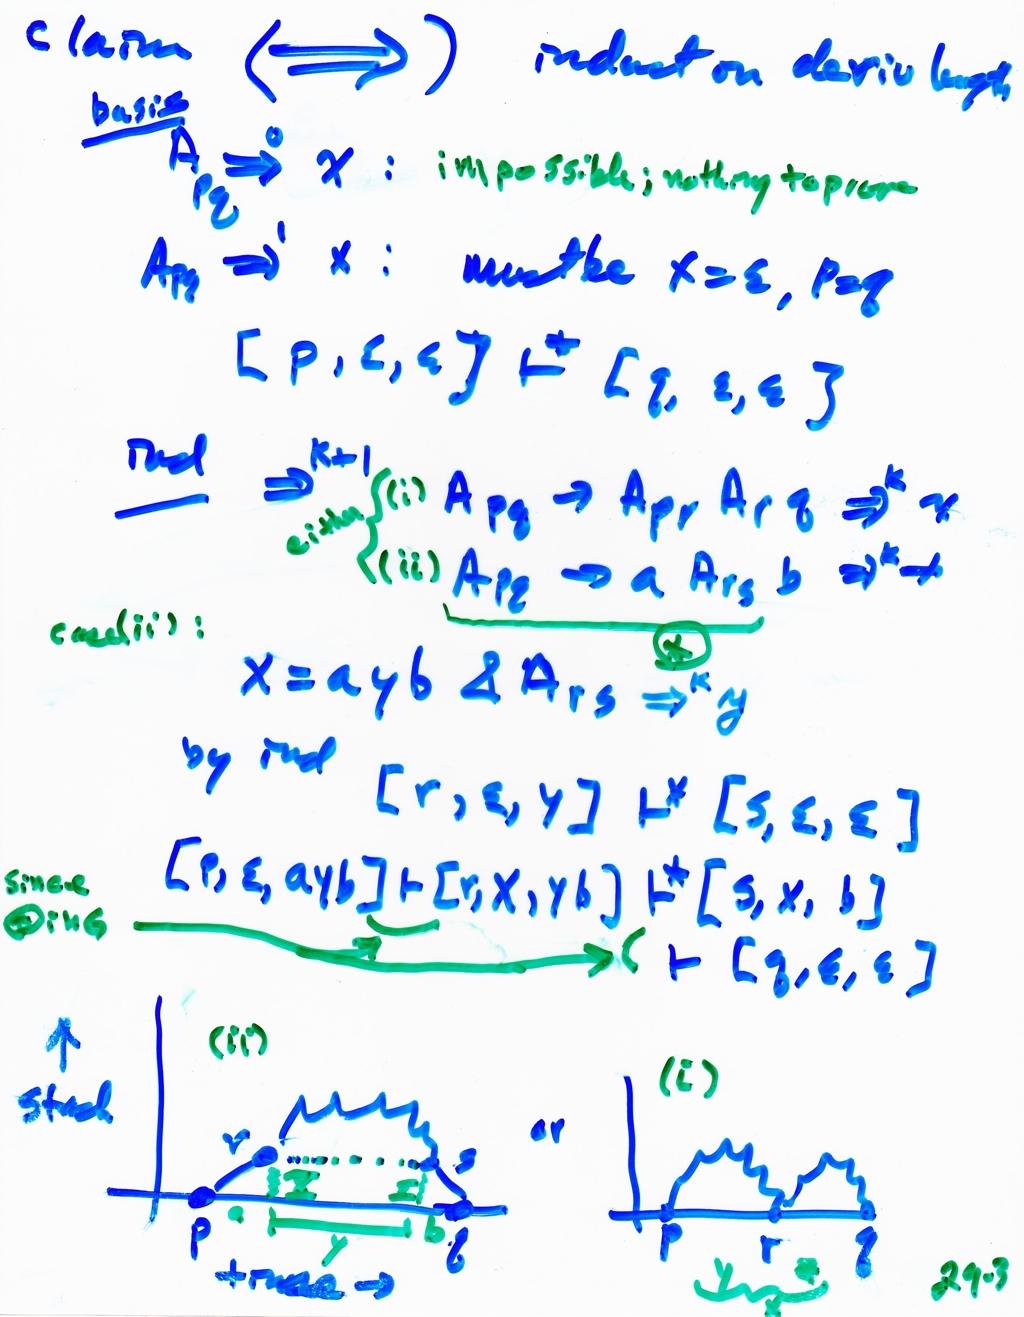 I.e., Ap gives set of inputs that allow M to go from state p to state, starting & ending with empty stack. I.e., Ap gives set of inputs that allow M to go from state p to state, starting & ending with empty stack. Case (i): exercise tack (and fact that M s stack is empty when it enters F) Time I.